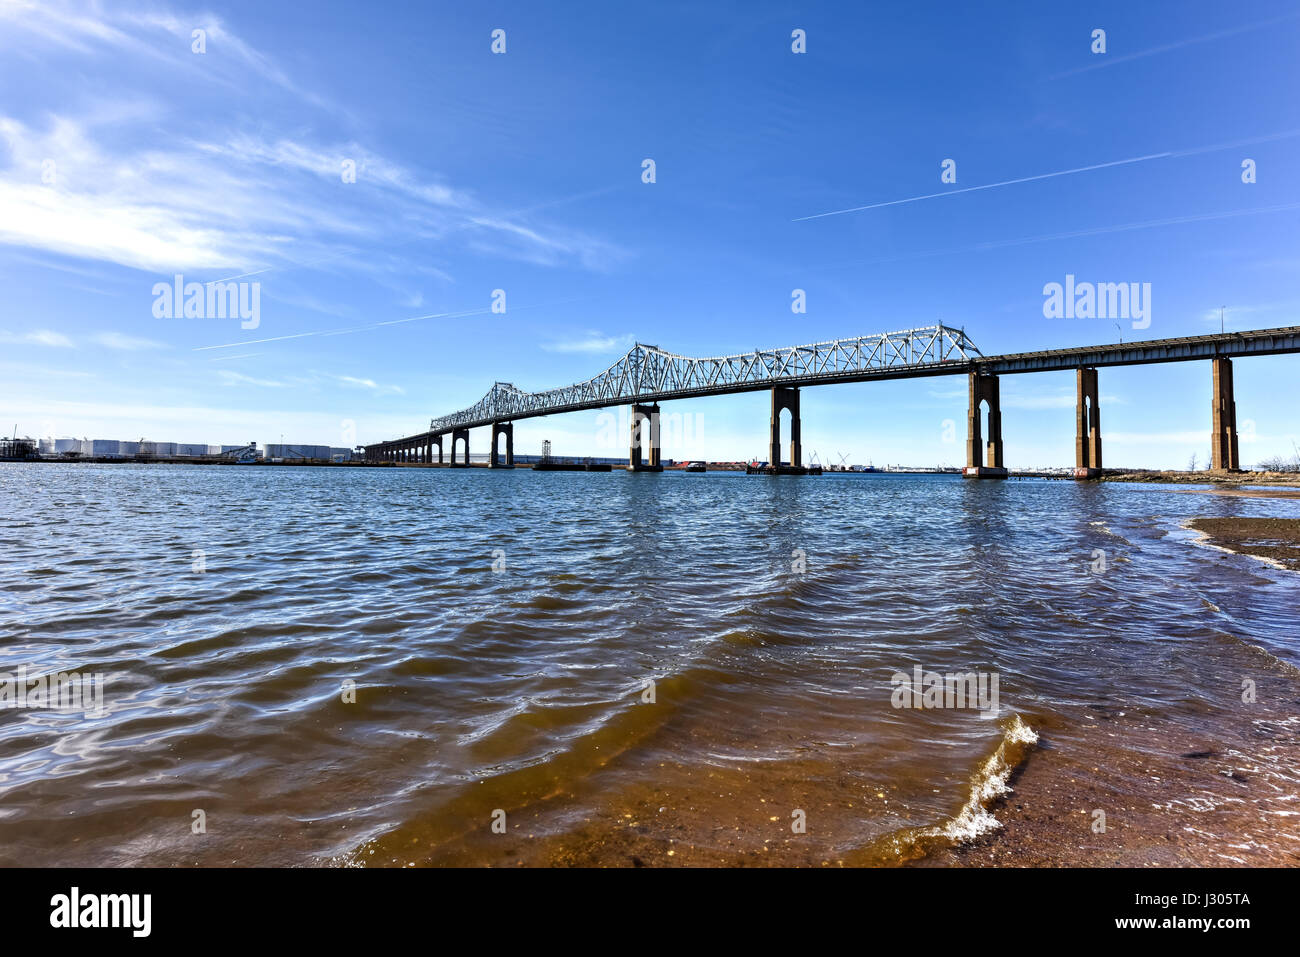 The Outerbridge Crossing is a cantilever bridge which spans the Arthur Kill. The 'Outerbridge', as it is often known, connects Perth Amboy, New Jersey Stock Photo